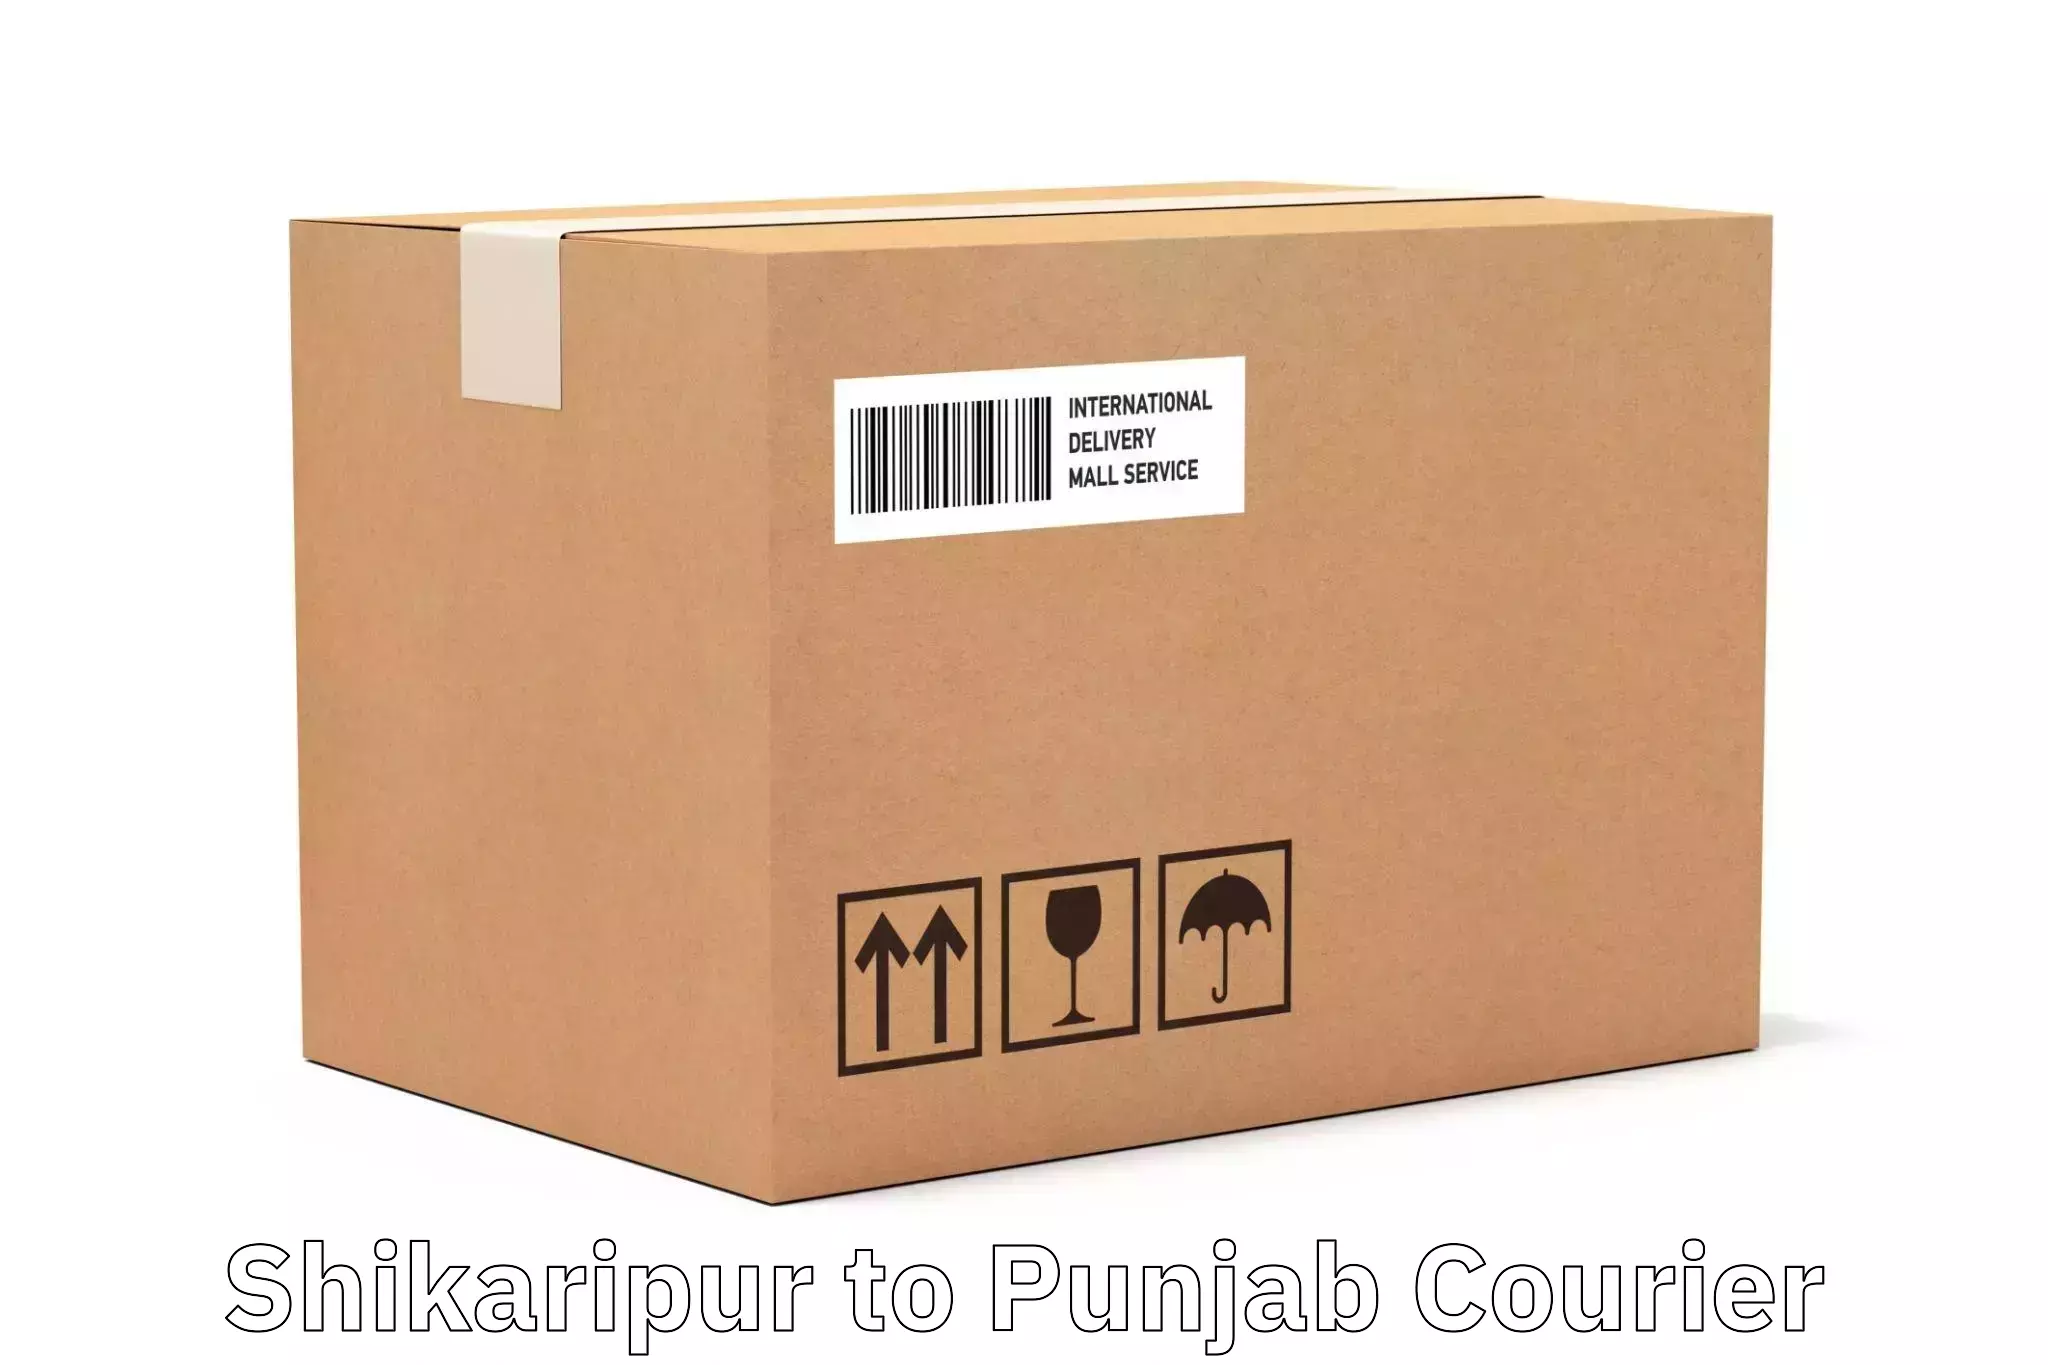 Speedy delivery service Shikaripur to Patiala